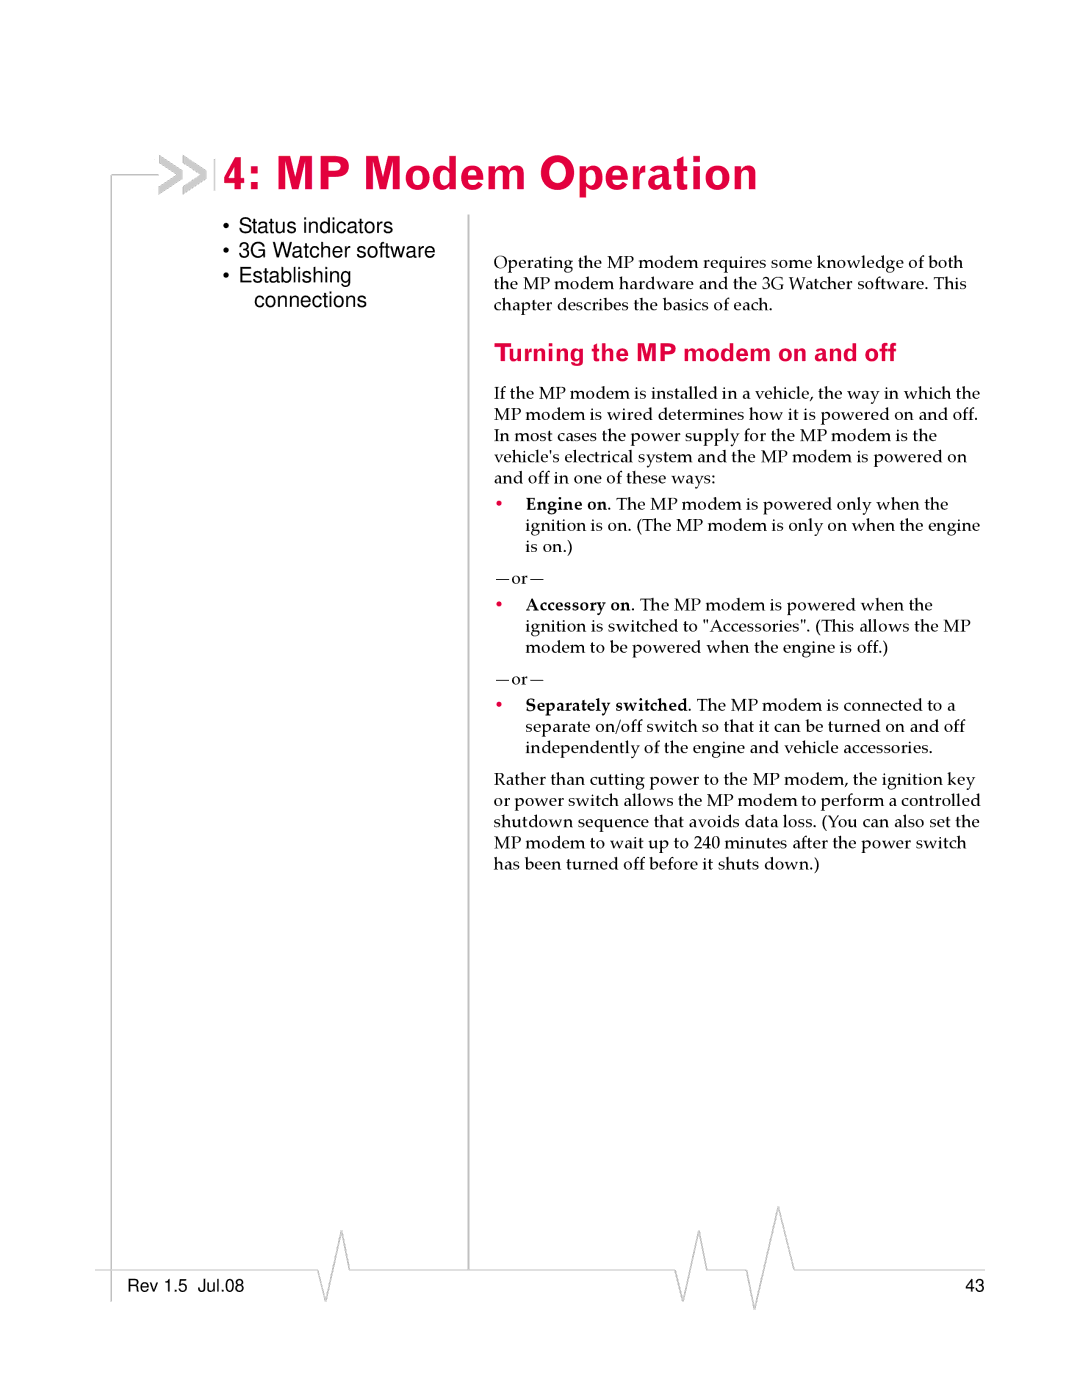 Sierra Wireless MP 875 manual MP Modem Operation, Turning the MP modem on and off 